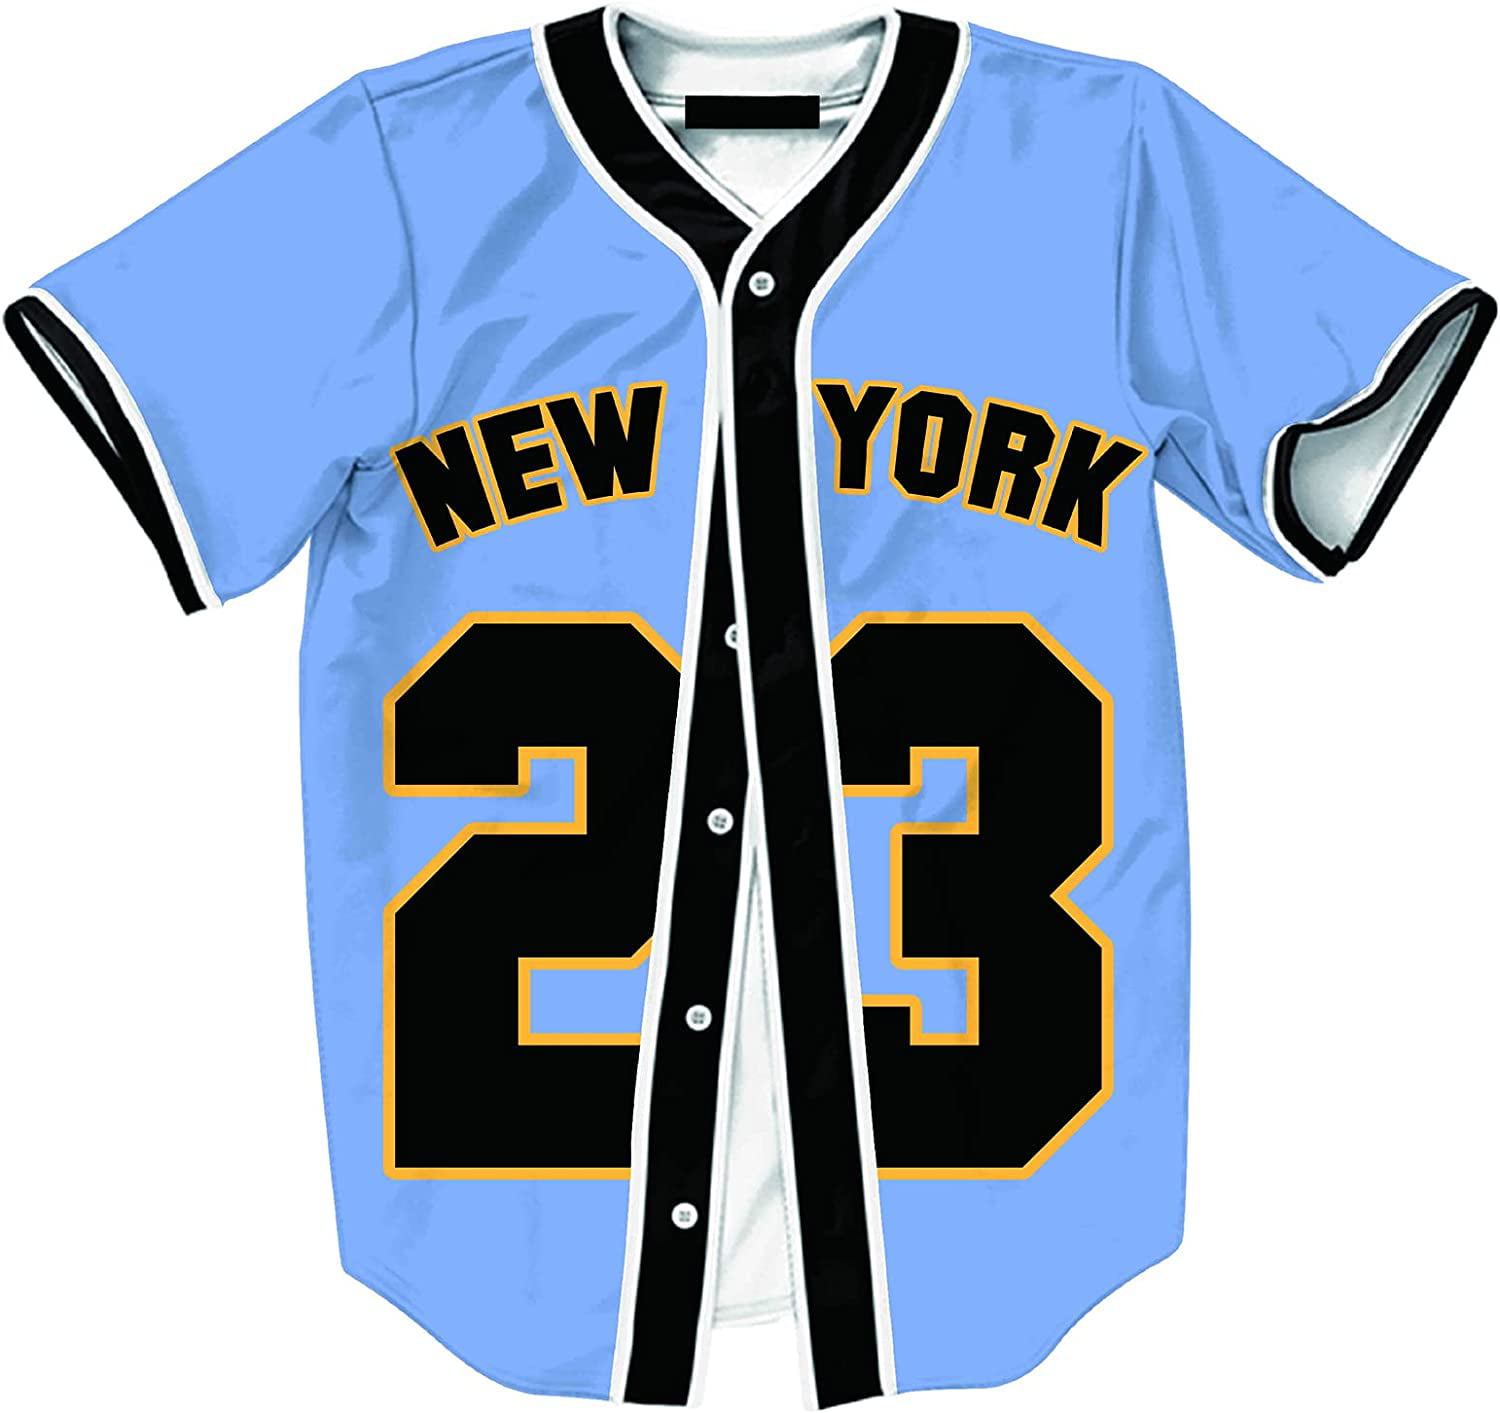 Baseball Jersey Classic New York 23 Stripes Design Printed for 80s